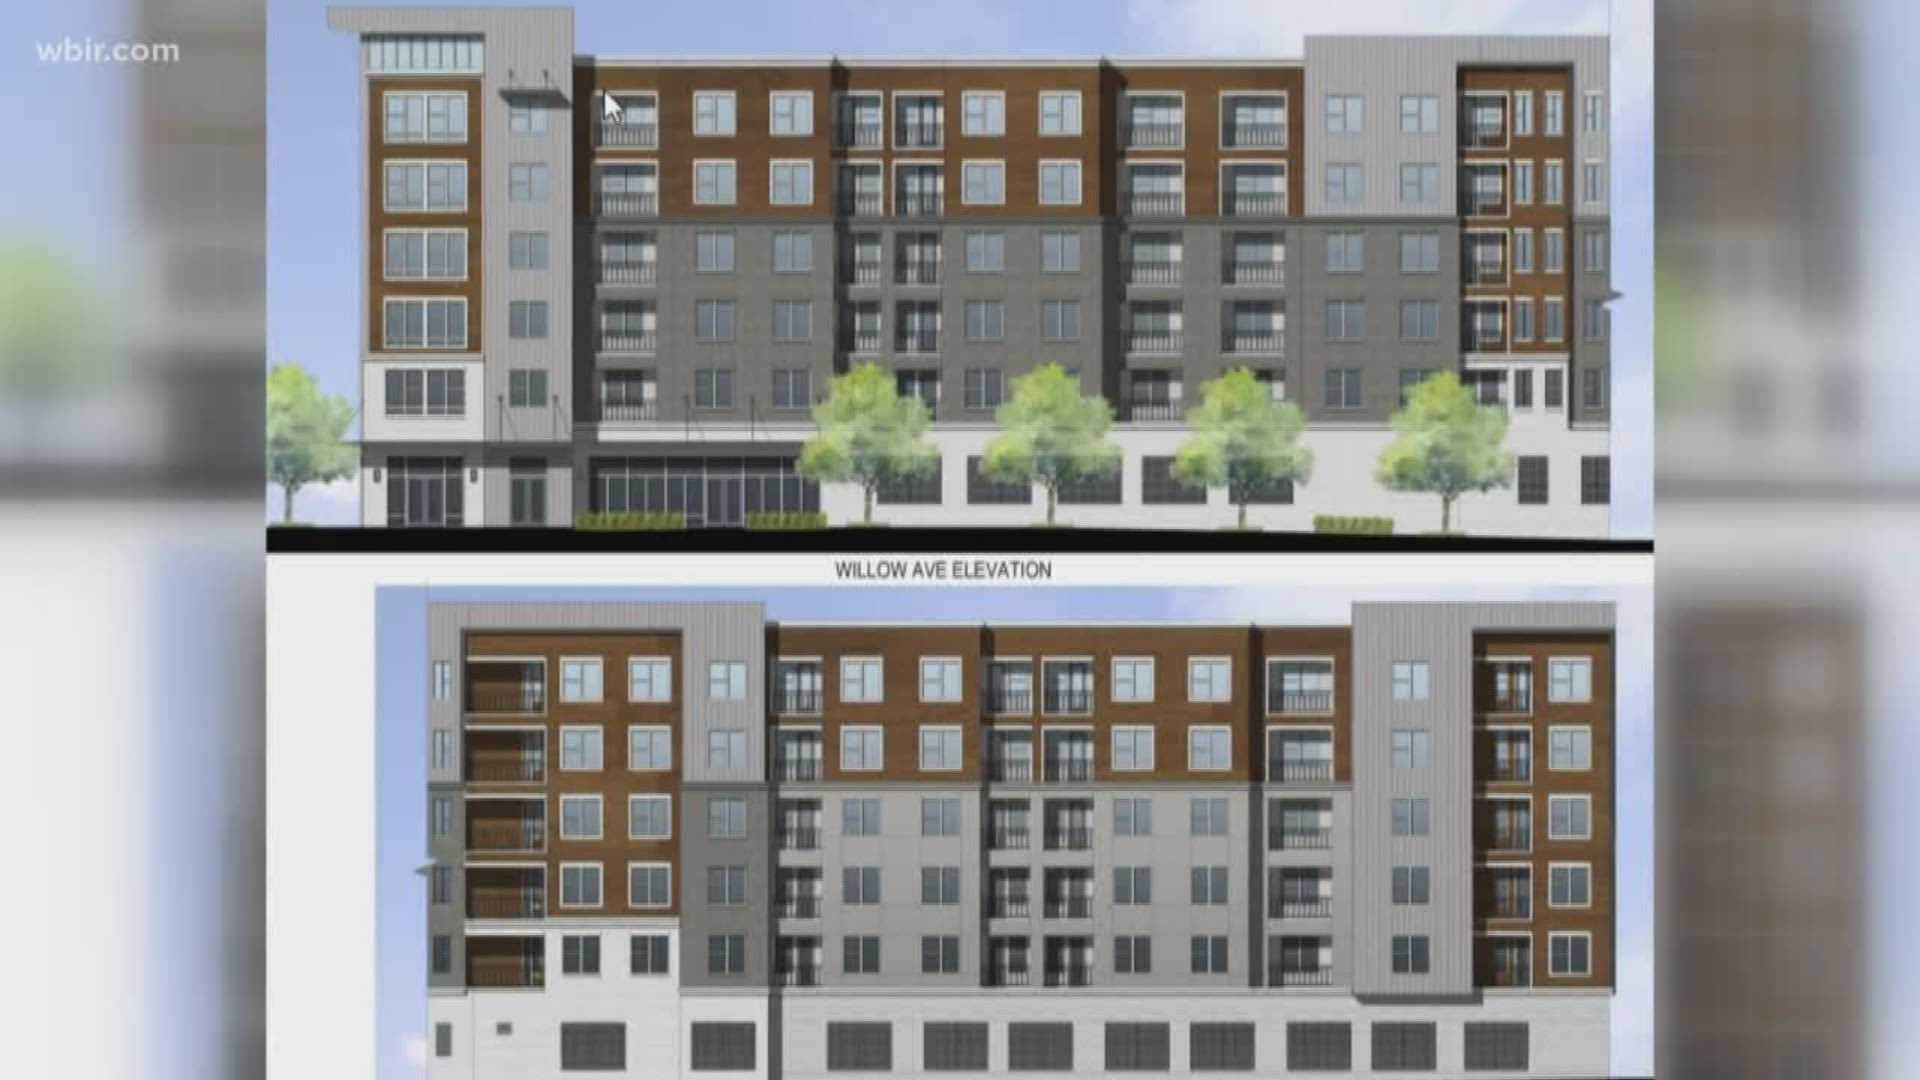 Developers are planning a new six-story apartment complex in the Old City.